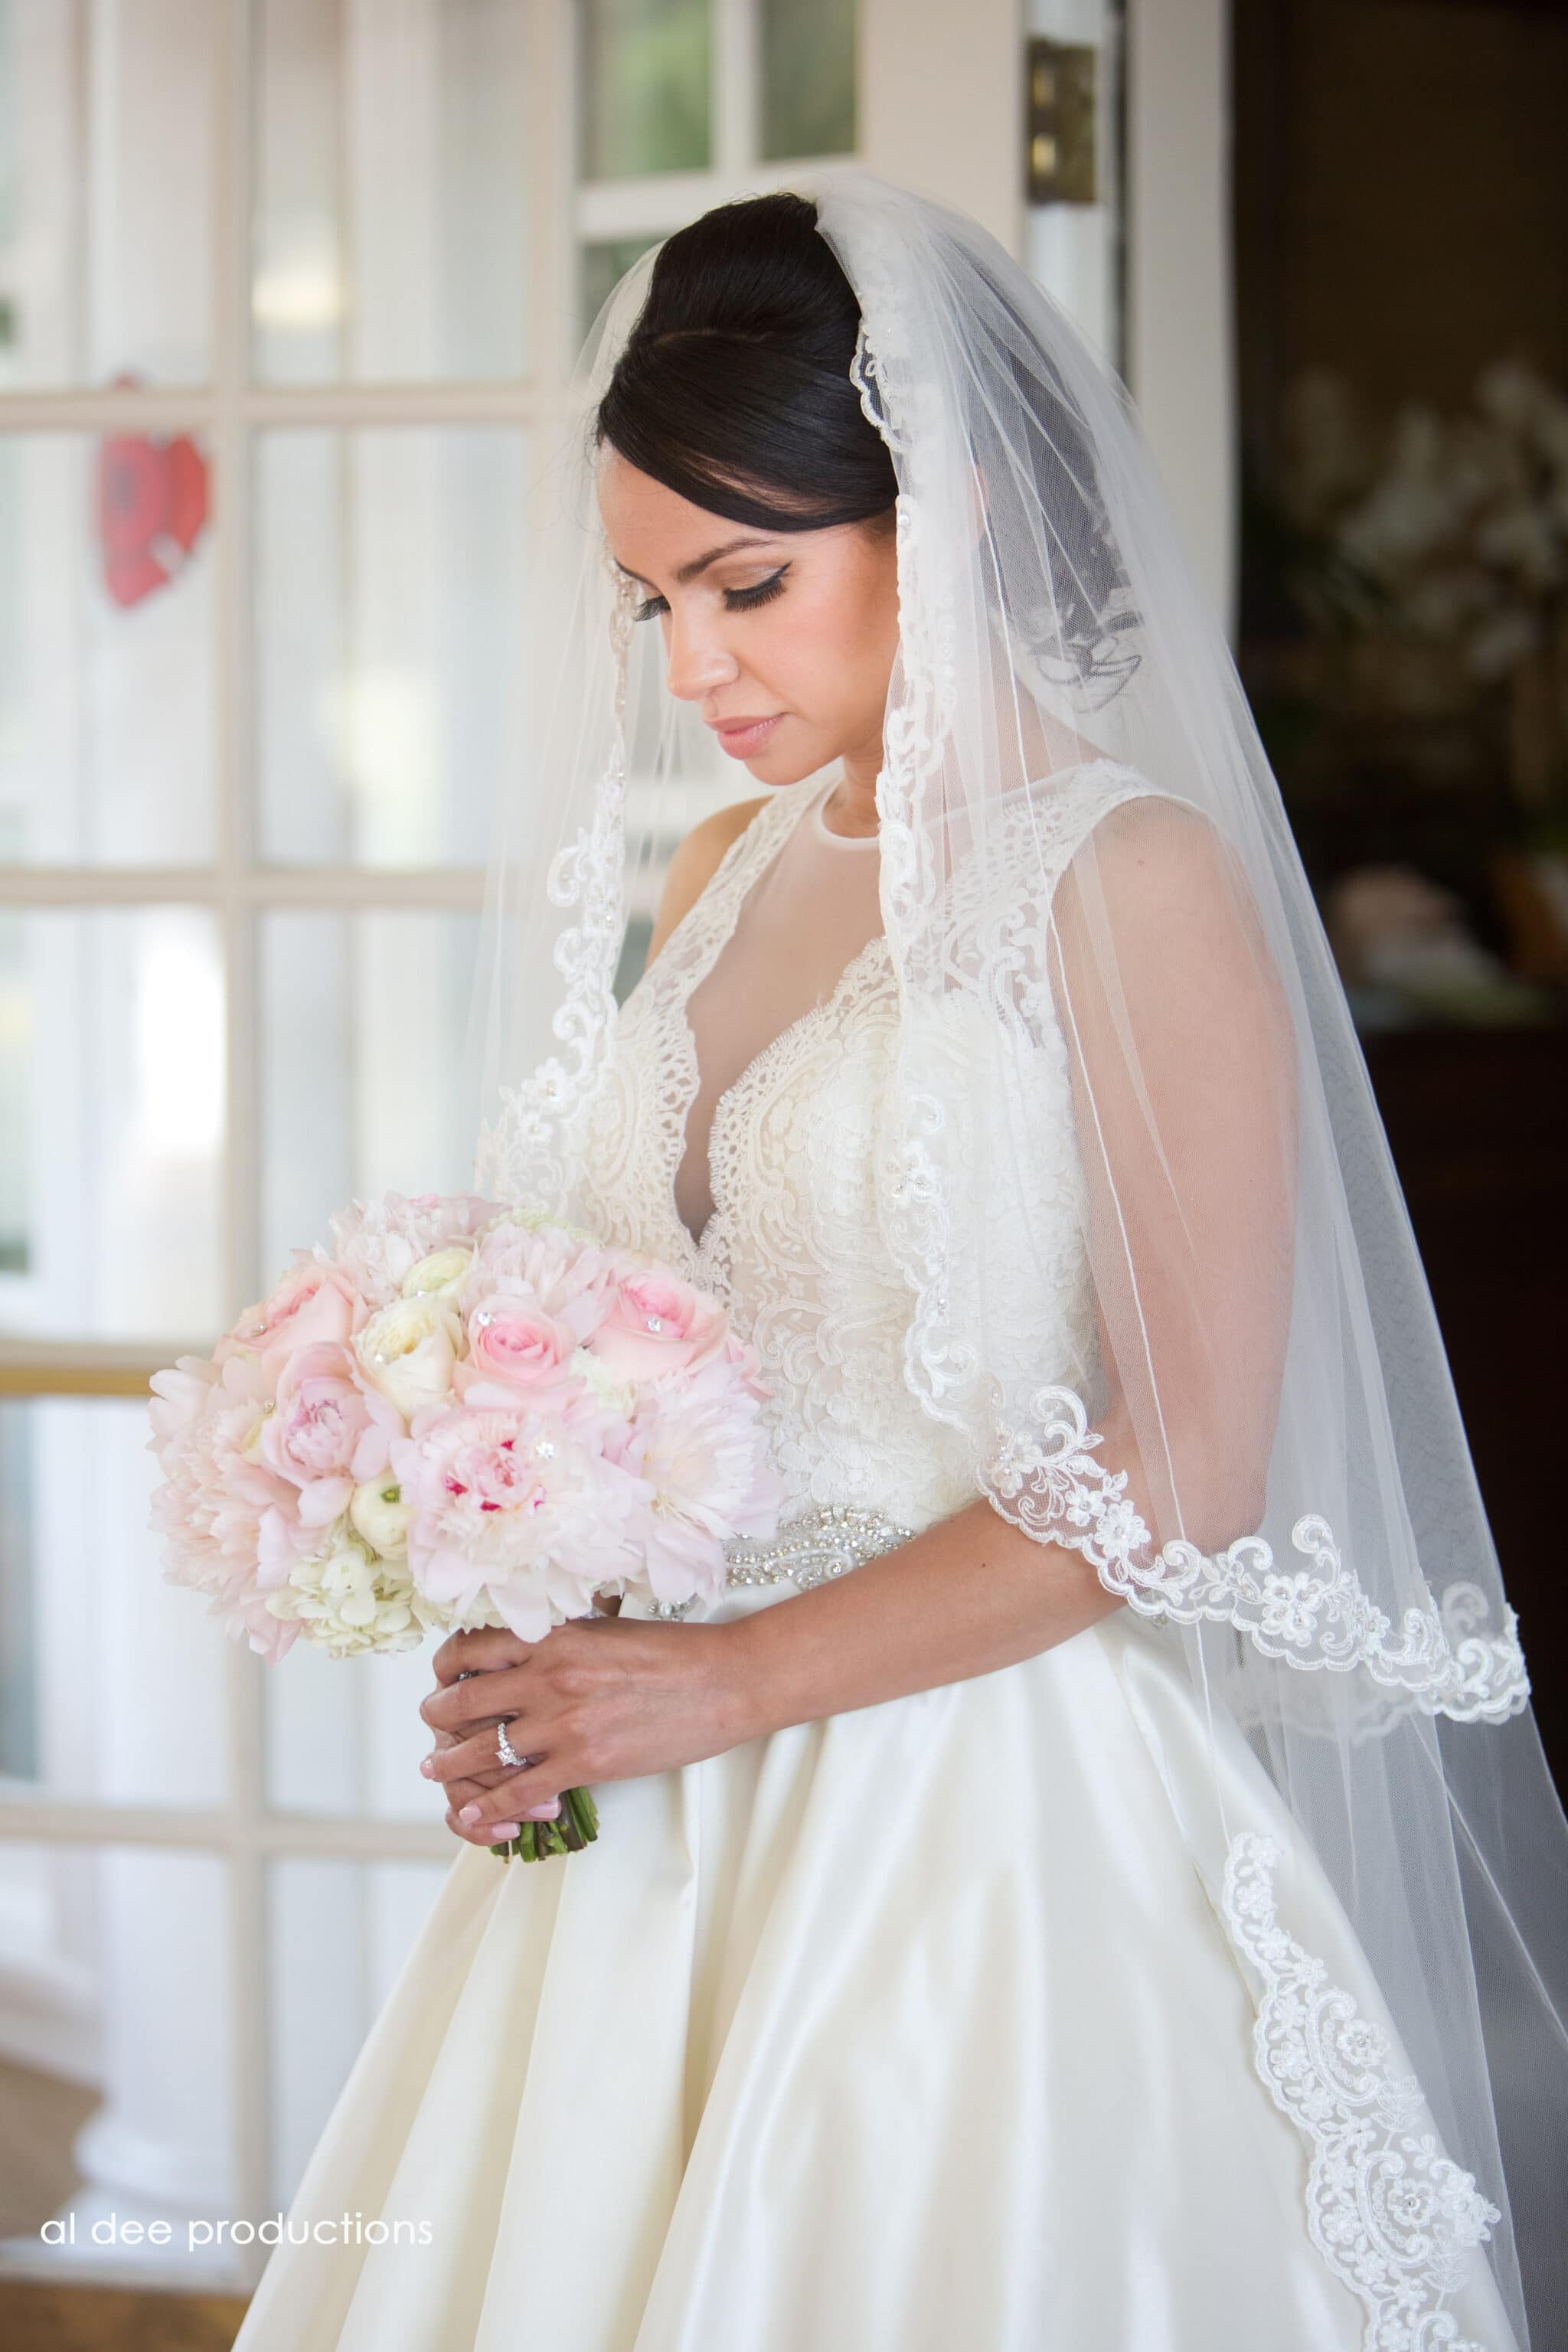 Beautiful bride looking down at her pink bouquet